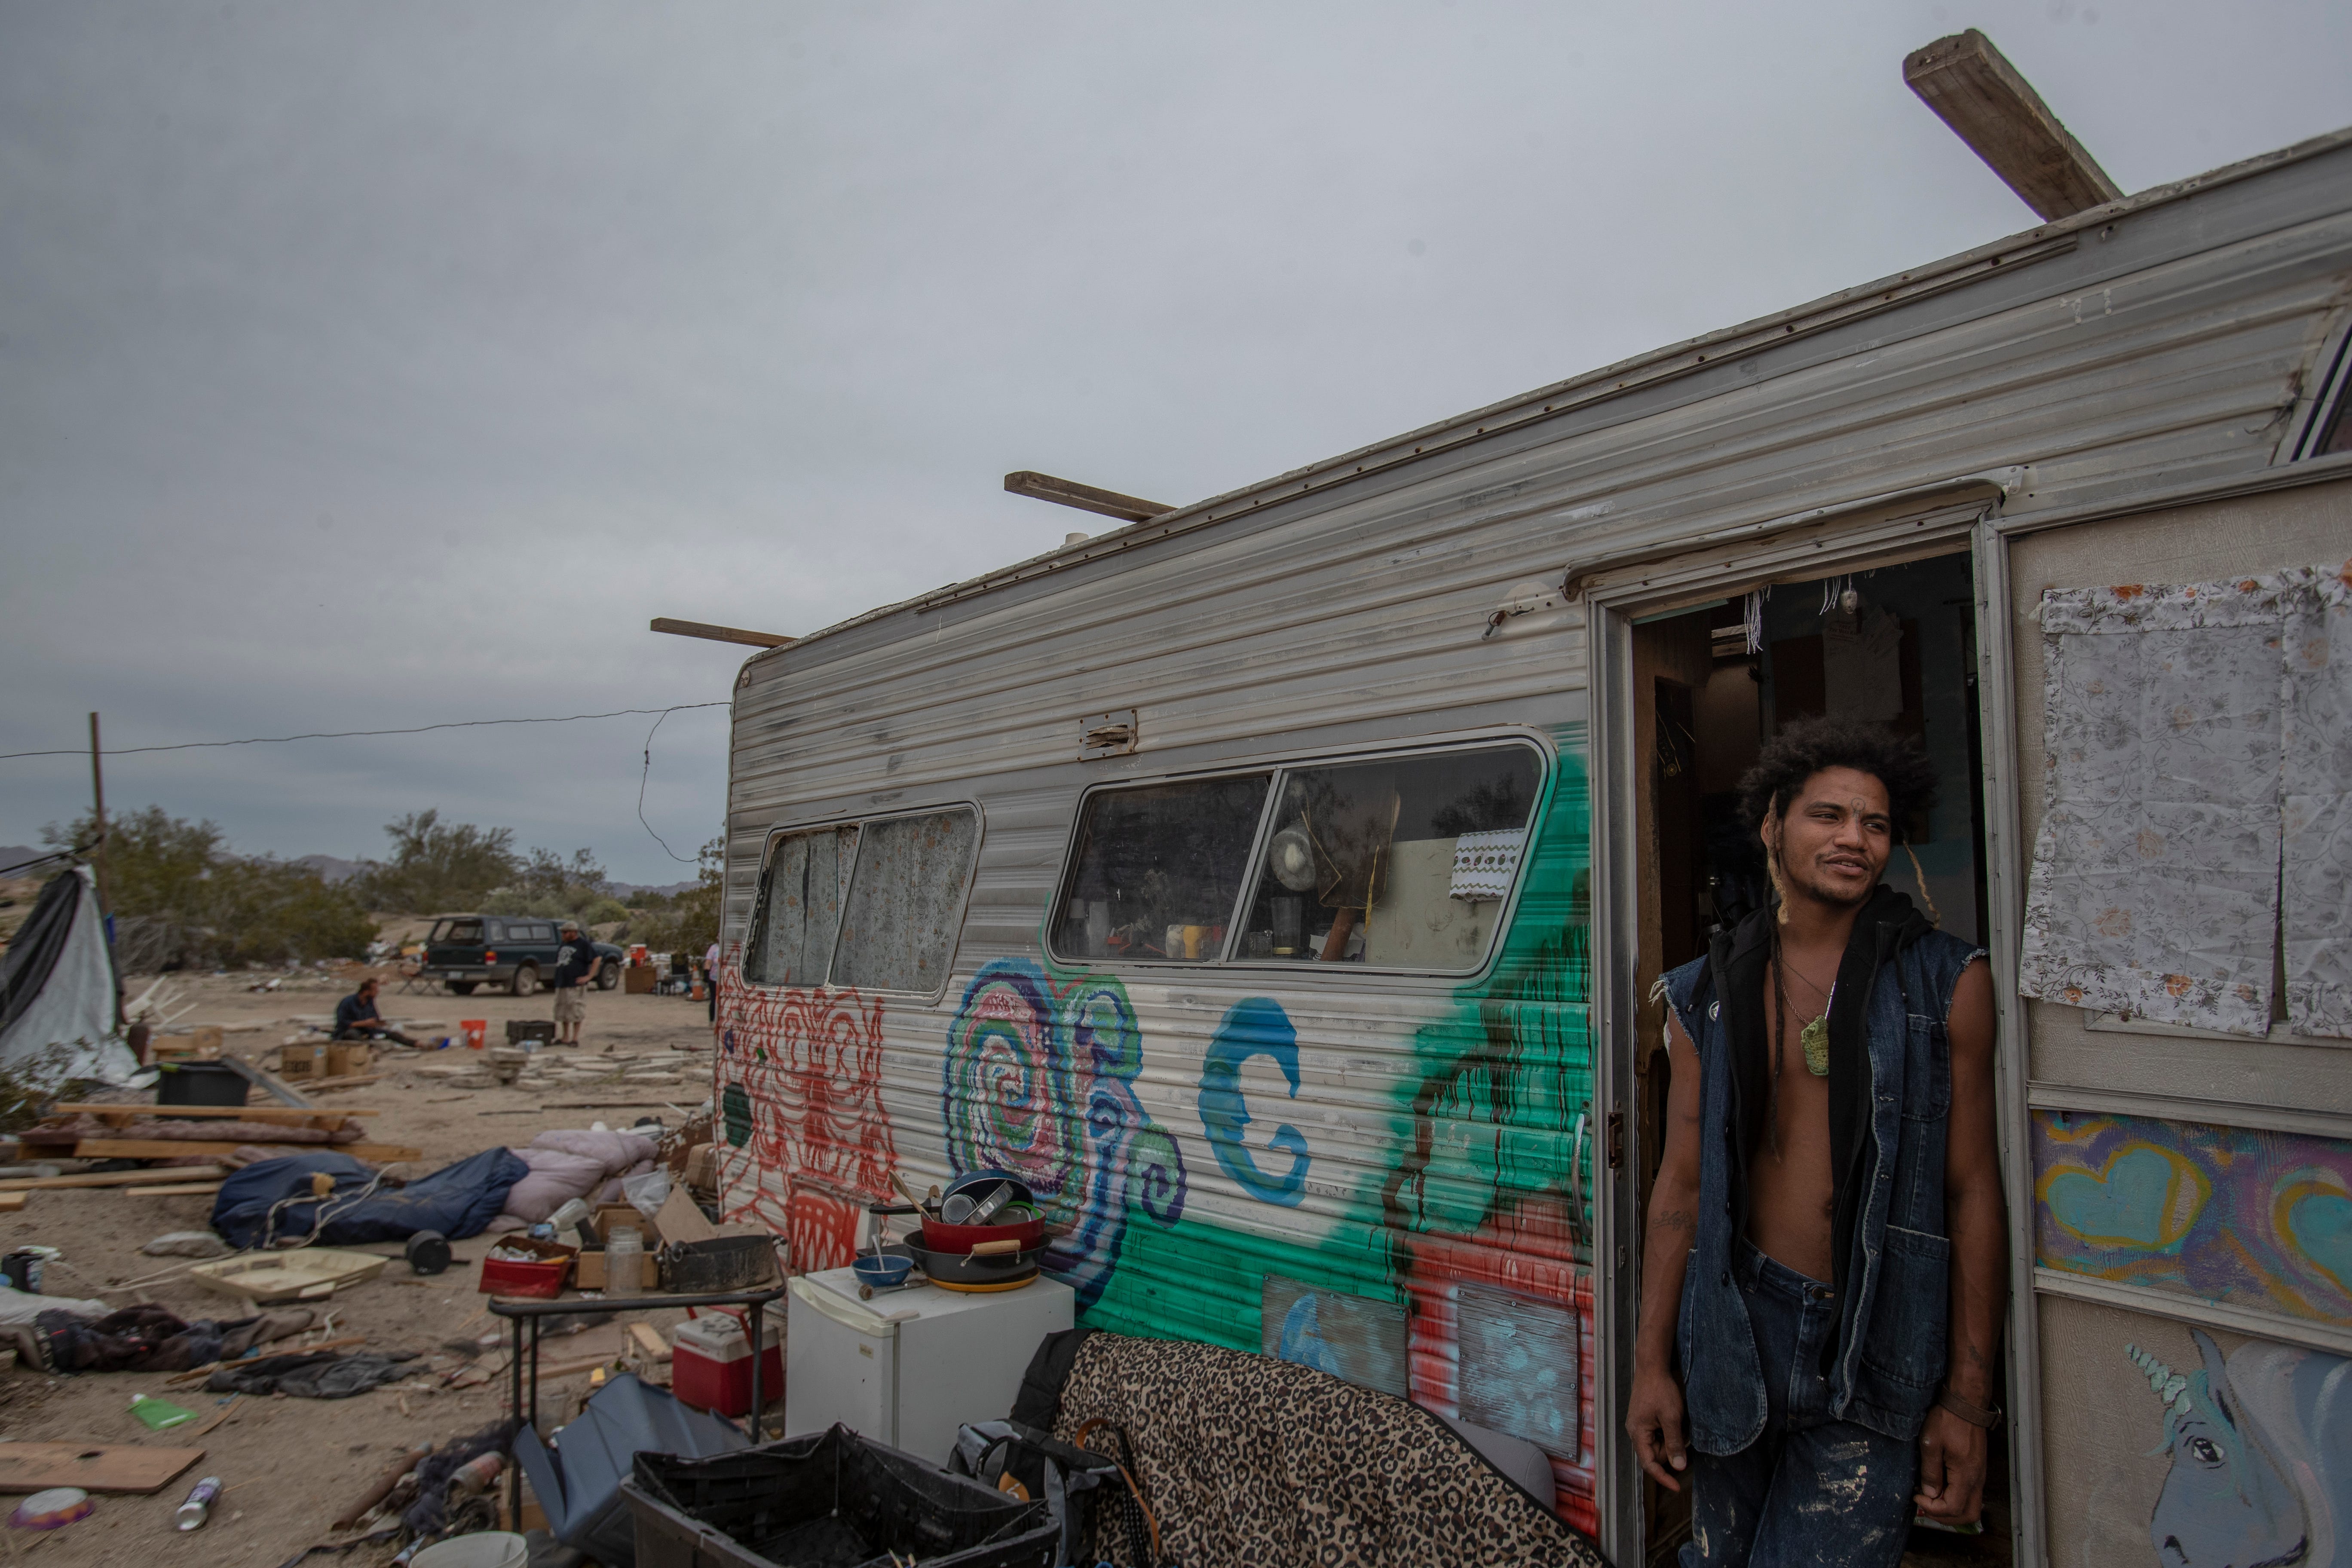 Gia Alden-Fox has lived on and off Slab City for a few years. He is worried that COVID-19 could enter his Flamingo Camp neighborhood, where some those in his camp have compromised immune systems.